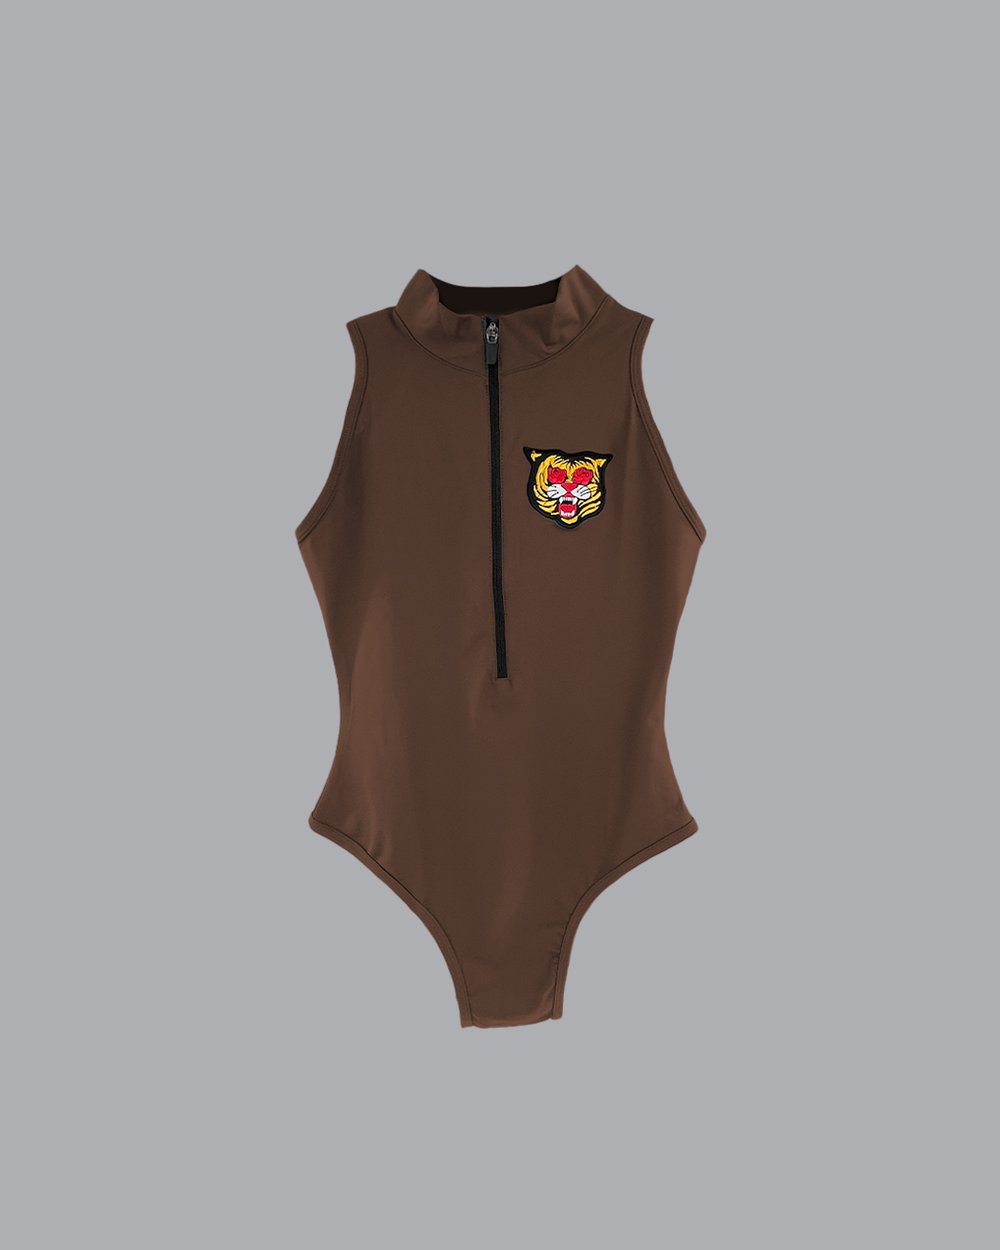 Image of The BLAK Bodysuit in Chocolate Brown